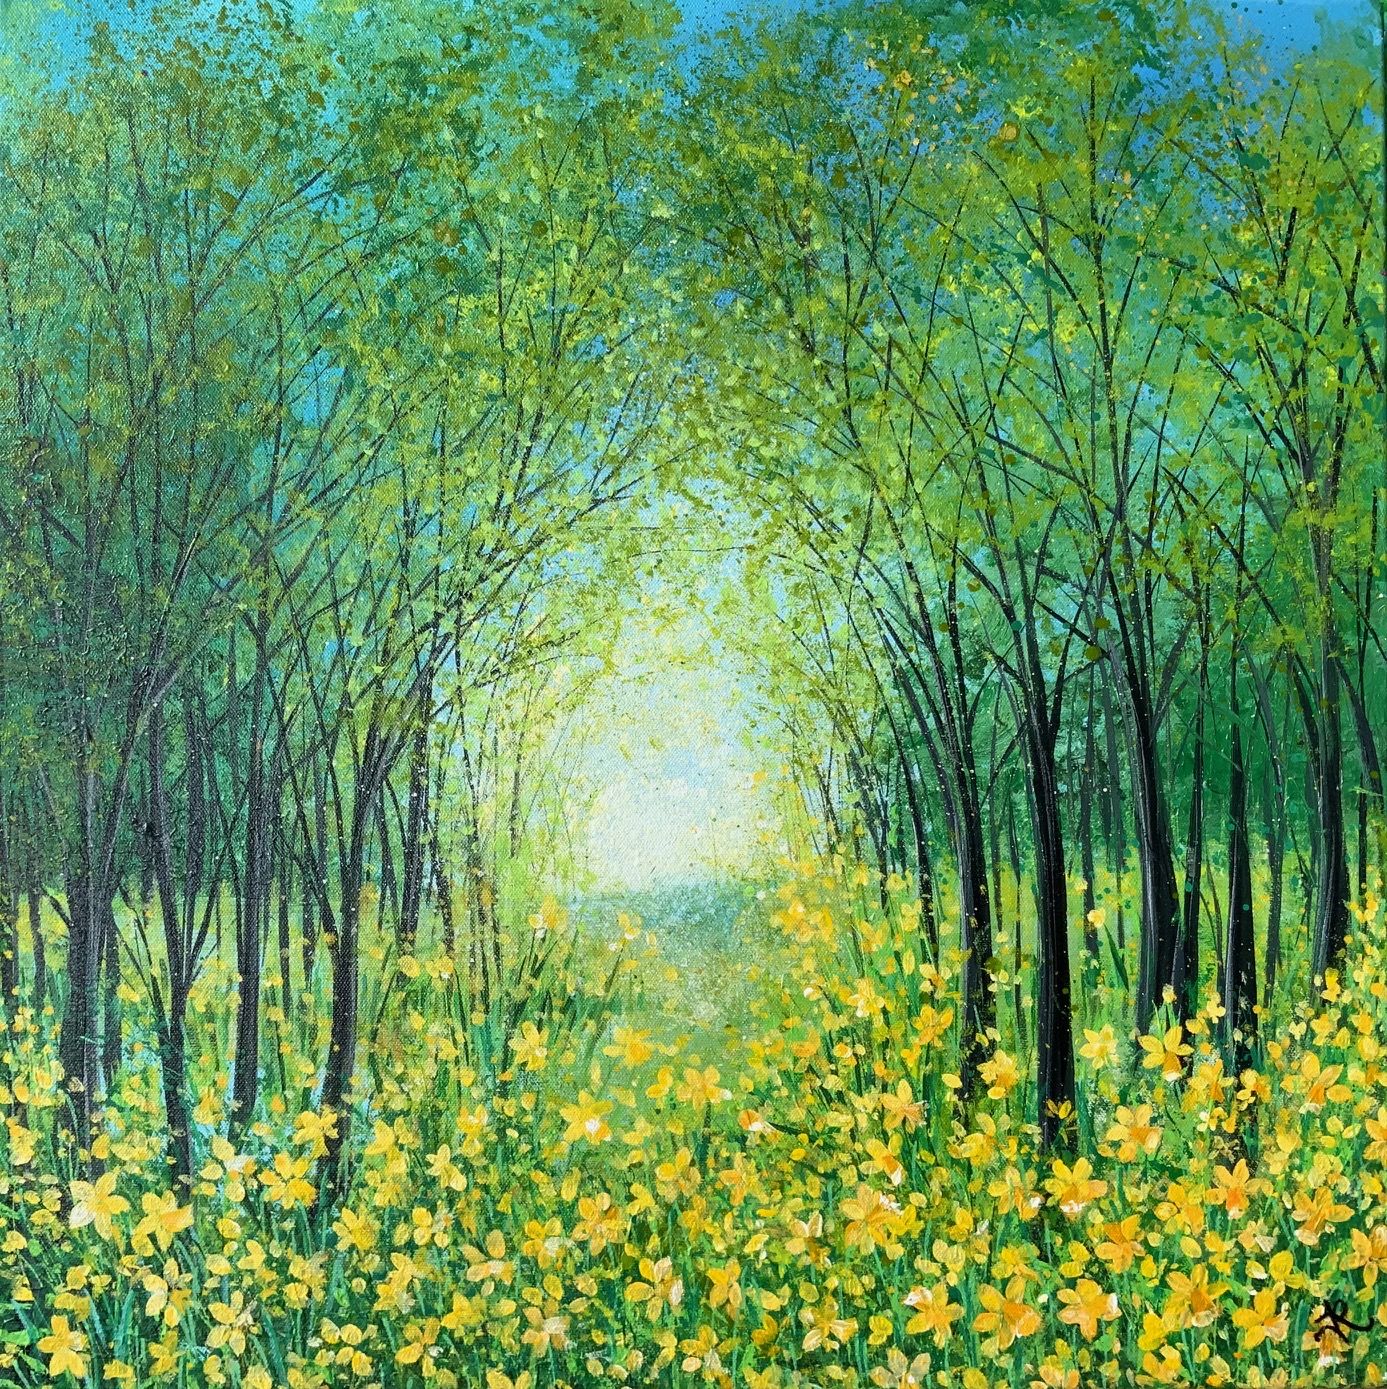 Grassmere Daffodils by Jan Rogers